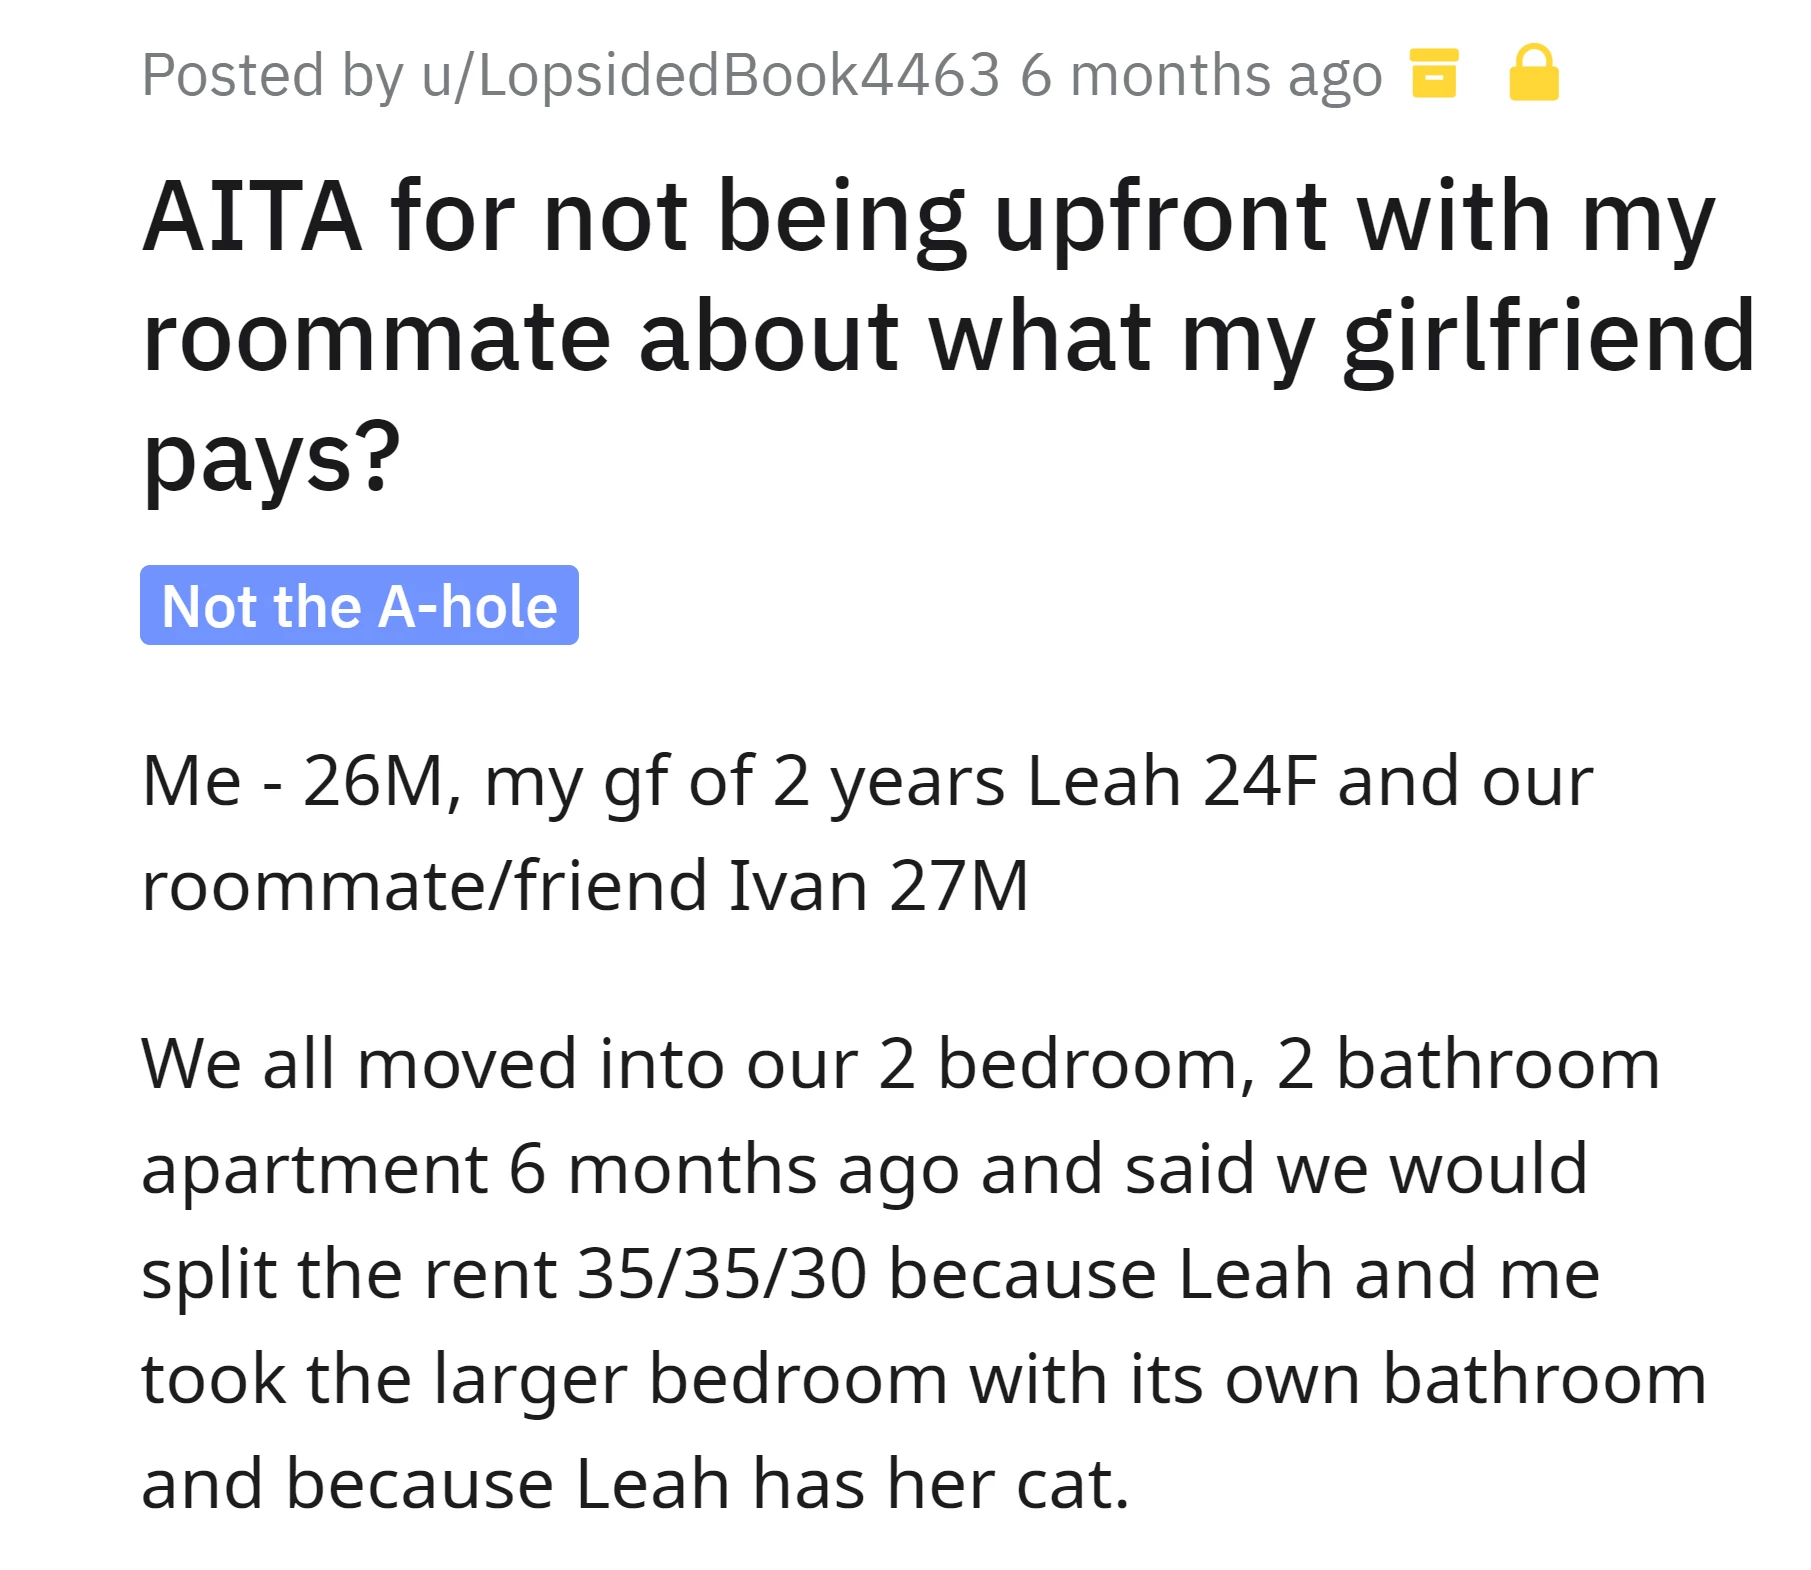 OP, his girlfriend Leah and their roommate Ivan agreed to split the rent at 35/35/30